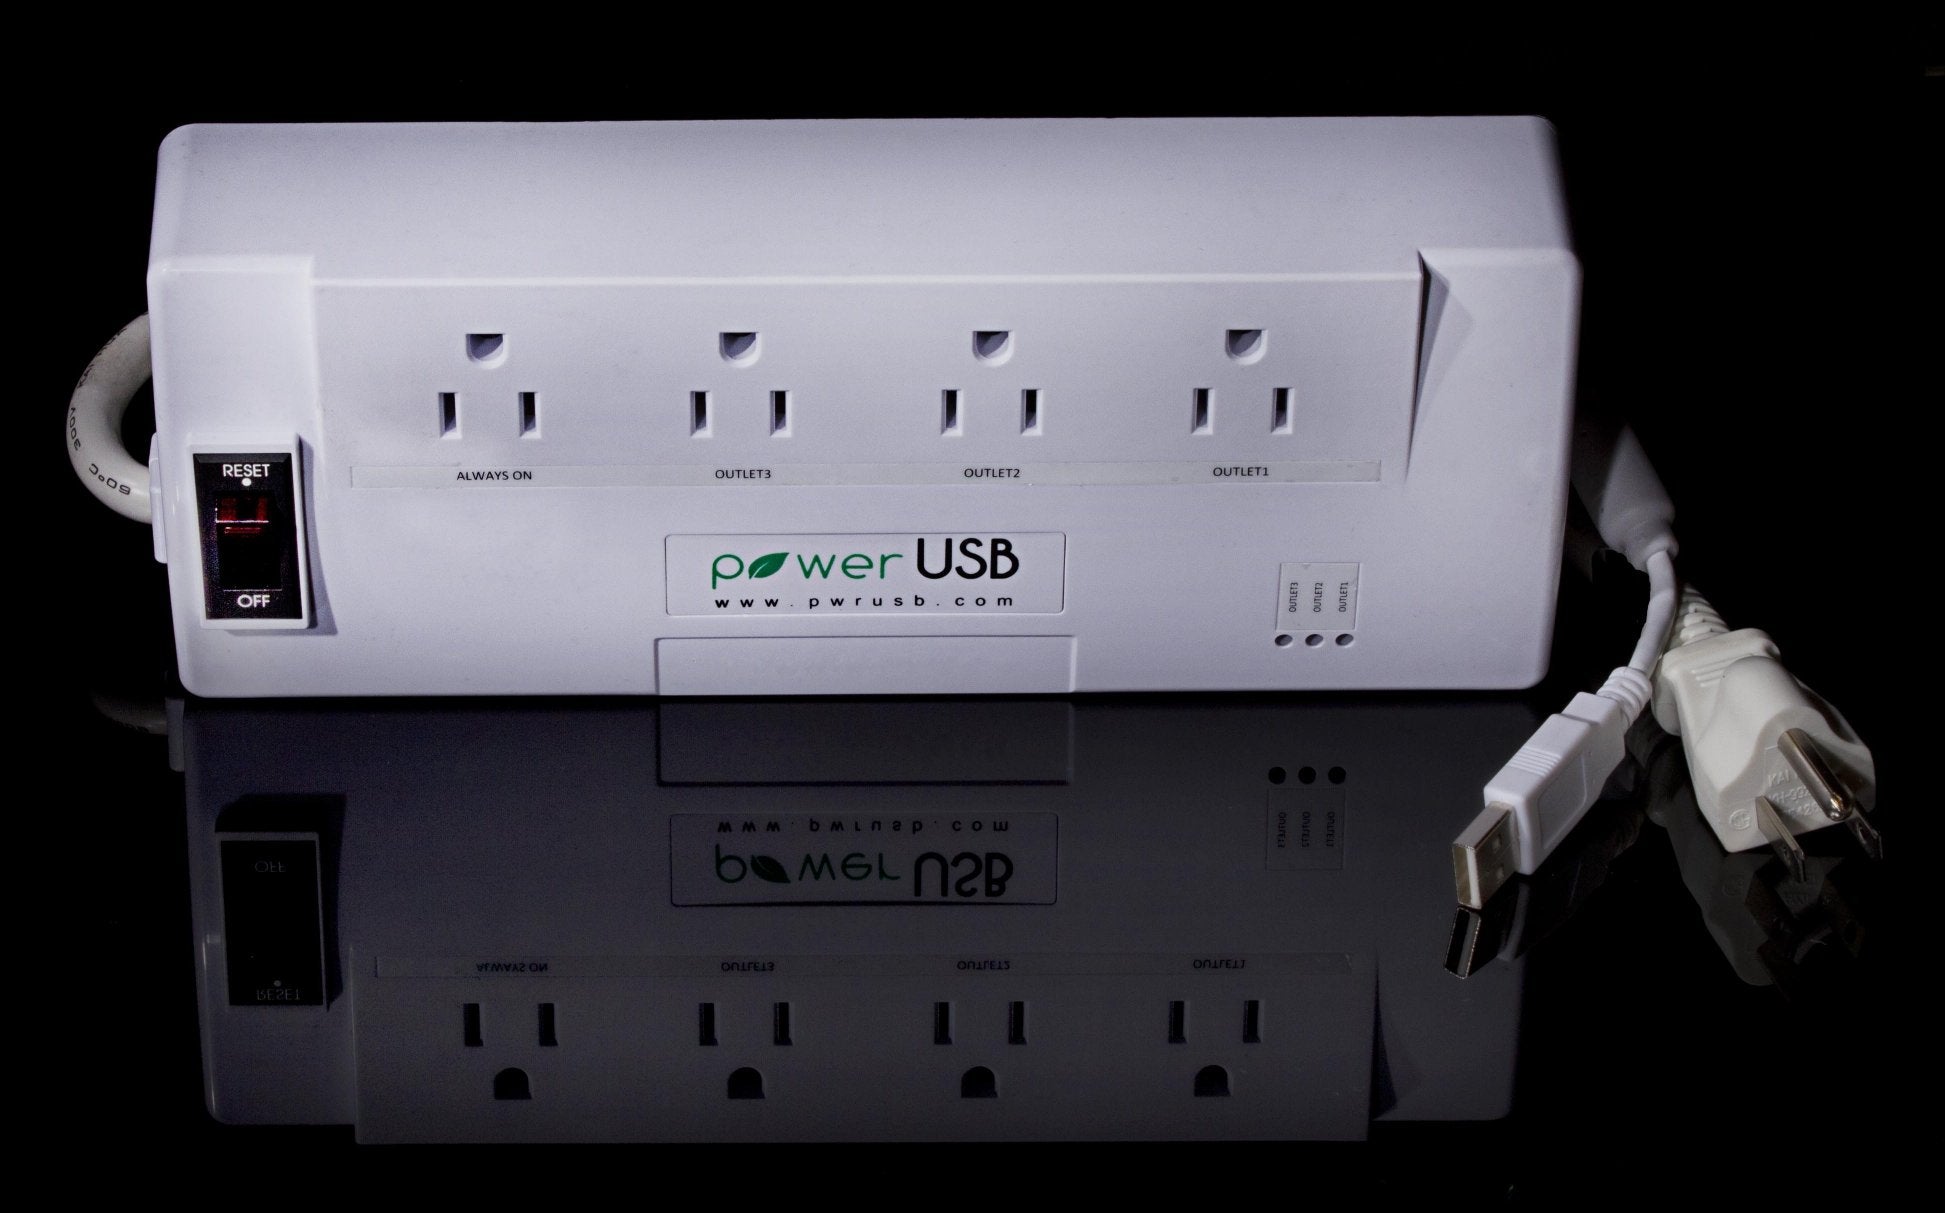 Power USB Controlled Power Strip, Power automation, automatically switch on outlets, Software power control, Timed switch on/off, Universal World socket, Control lights and Appliances from PC, Commercial Automation, Industrial Automation, PLC,